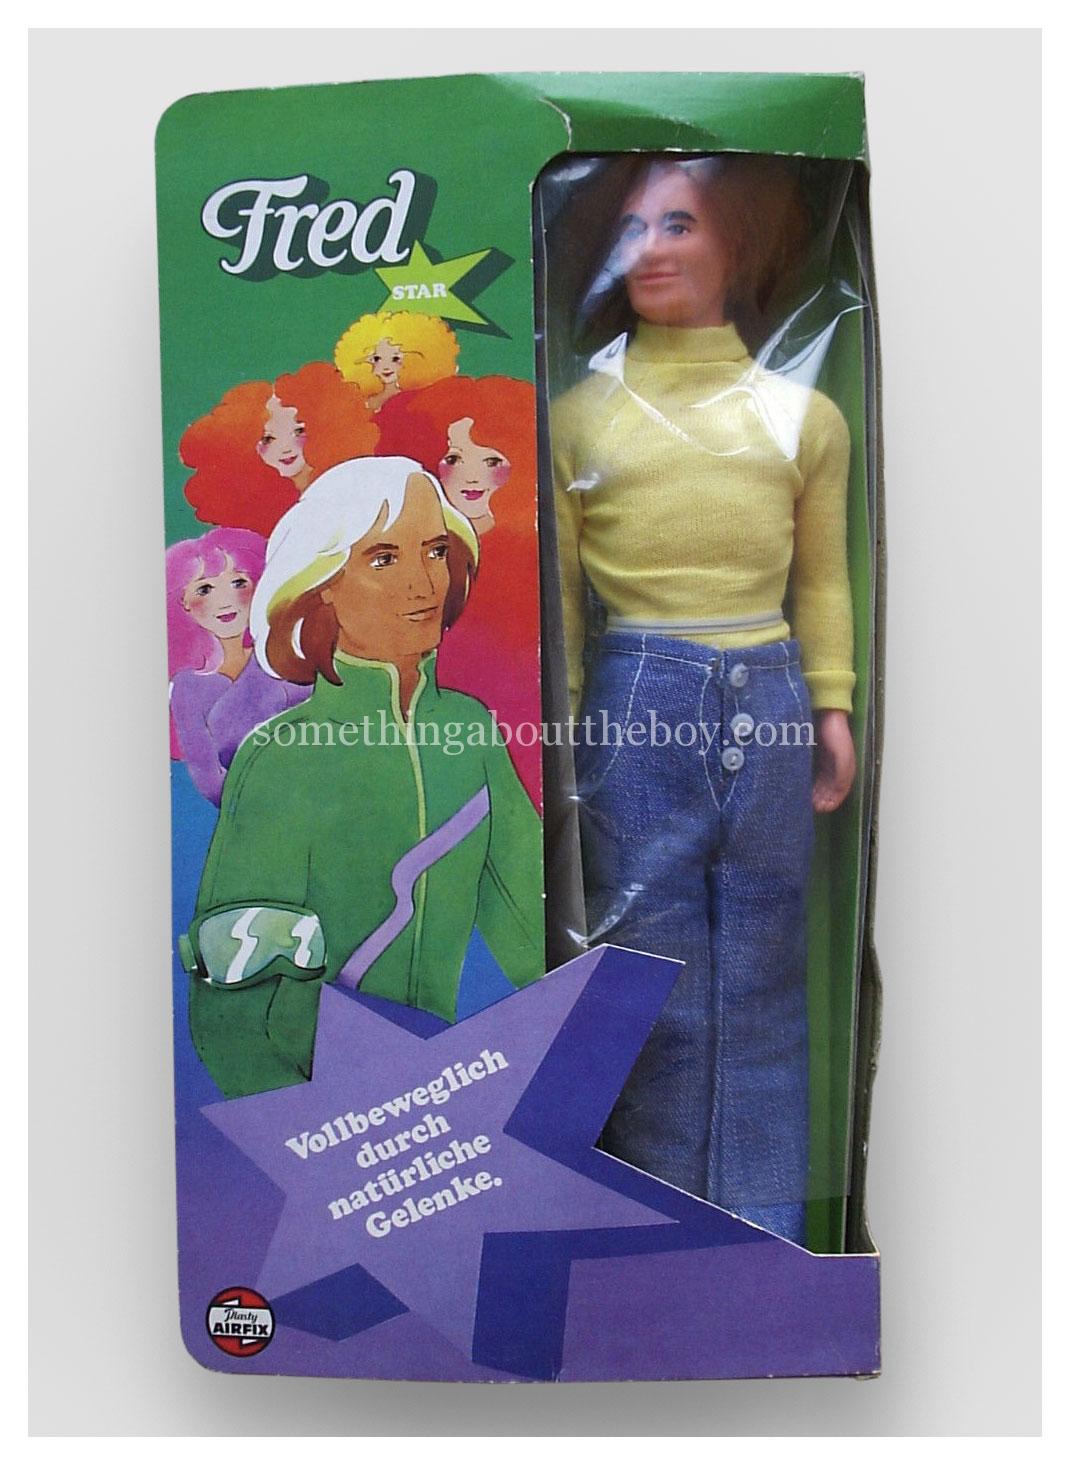 1975-77 Fred Star #5794 with original packaging